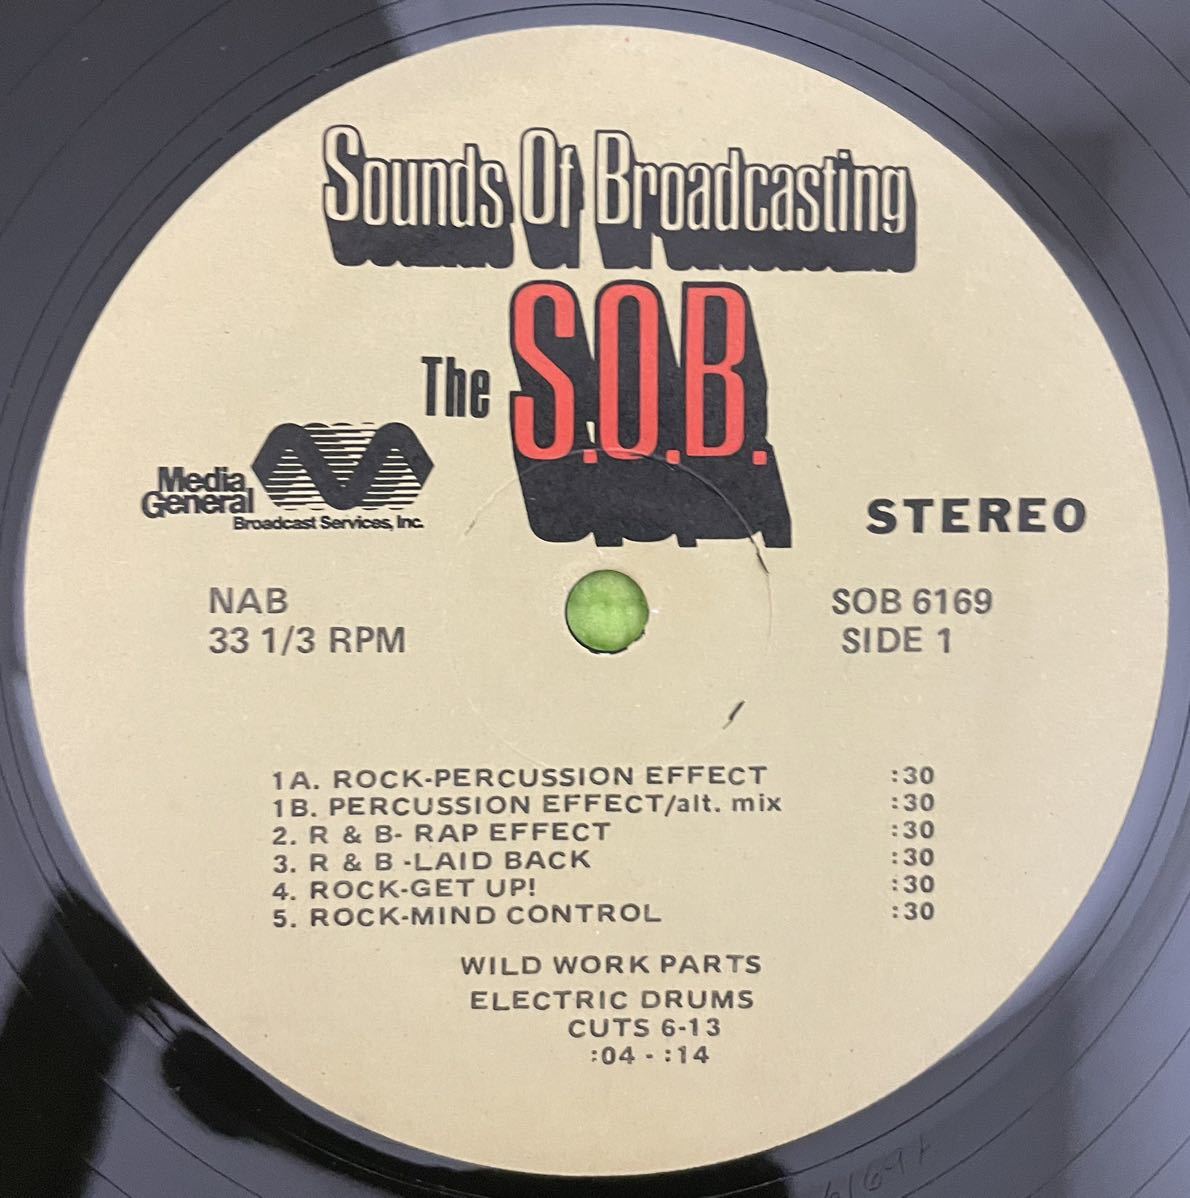 Raregroove electro sampling record レアグルーブ　エレクトロ　サンプリング　レコード　sounds of broadcasting the s.o.b. Sob 6169_画像3